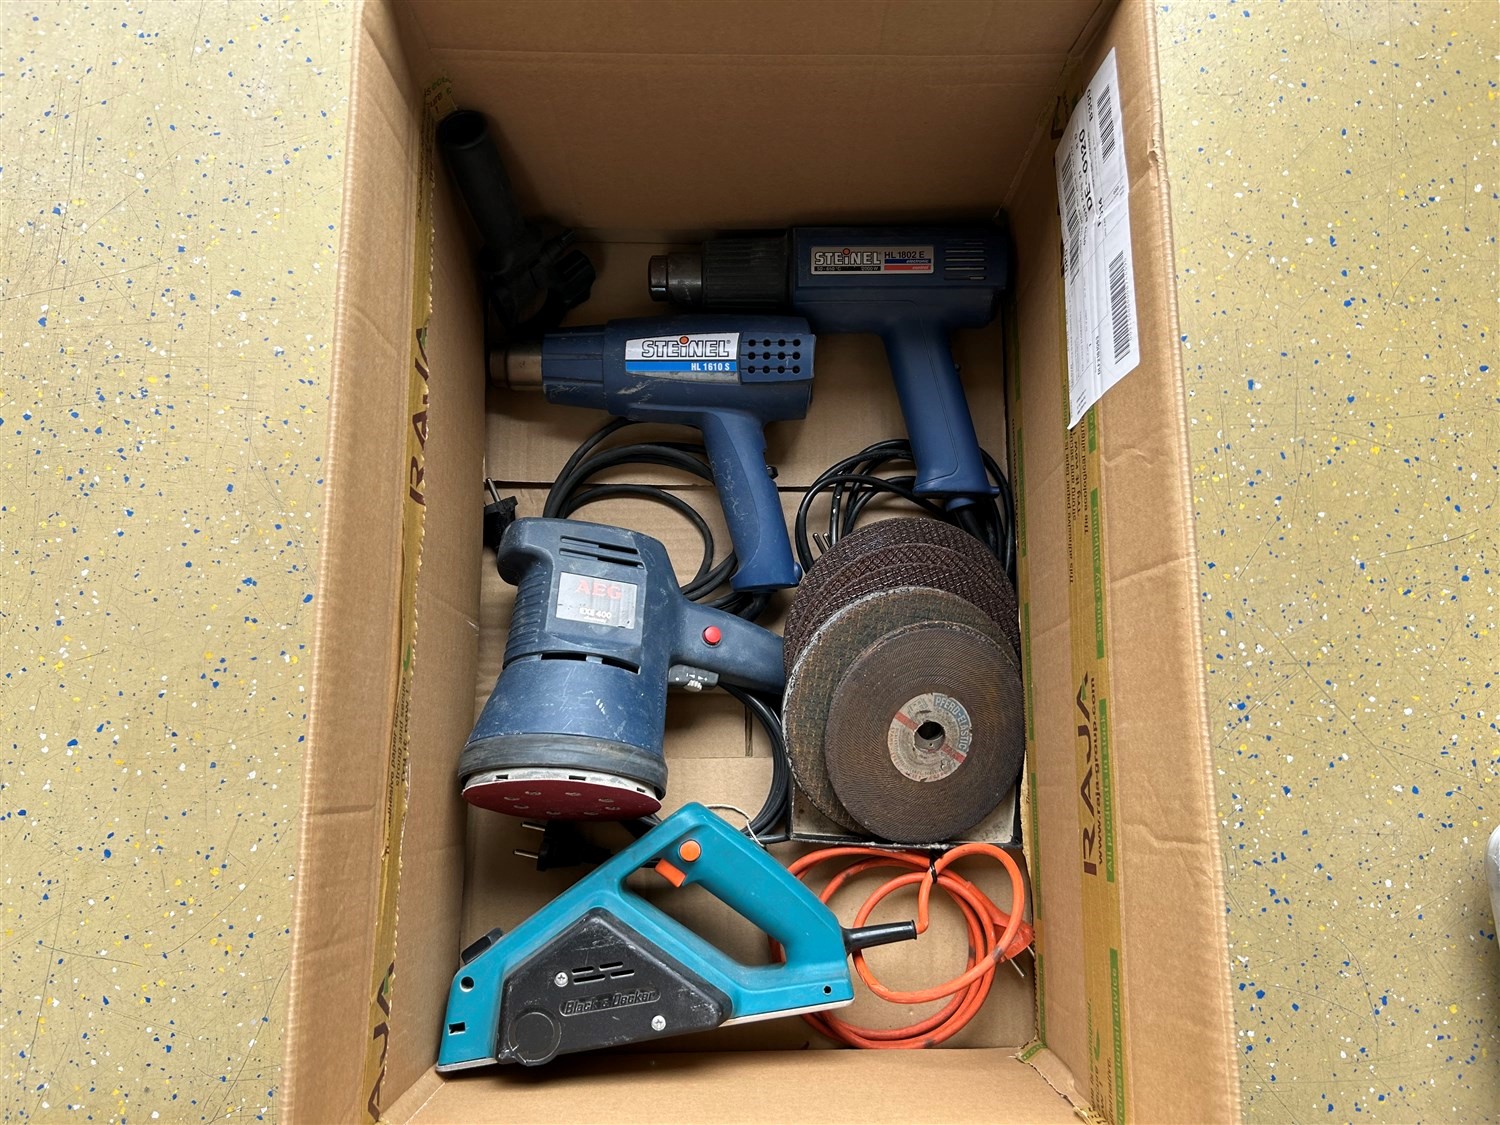 1 batch of power tools